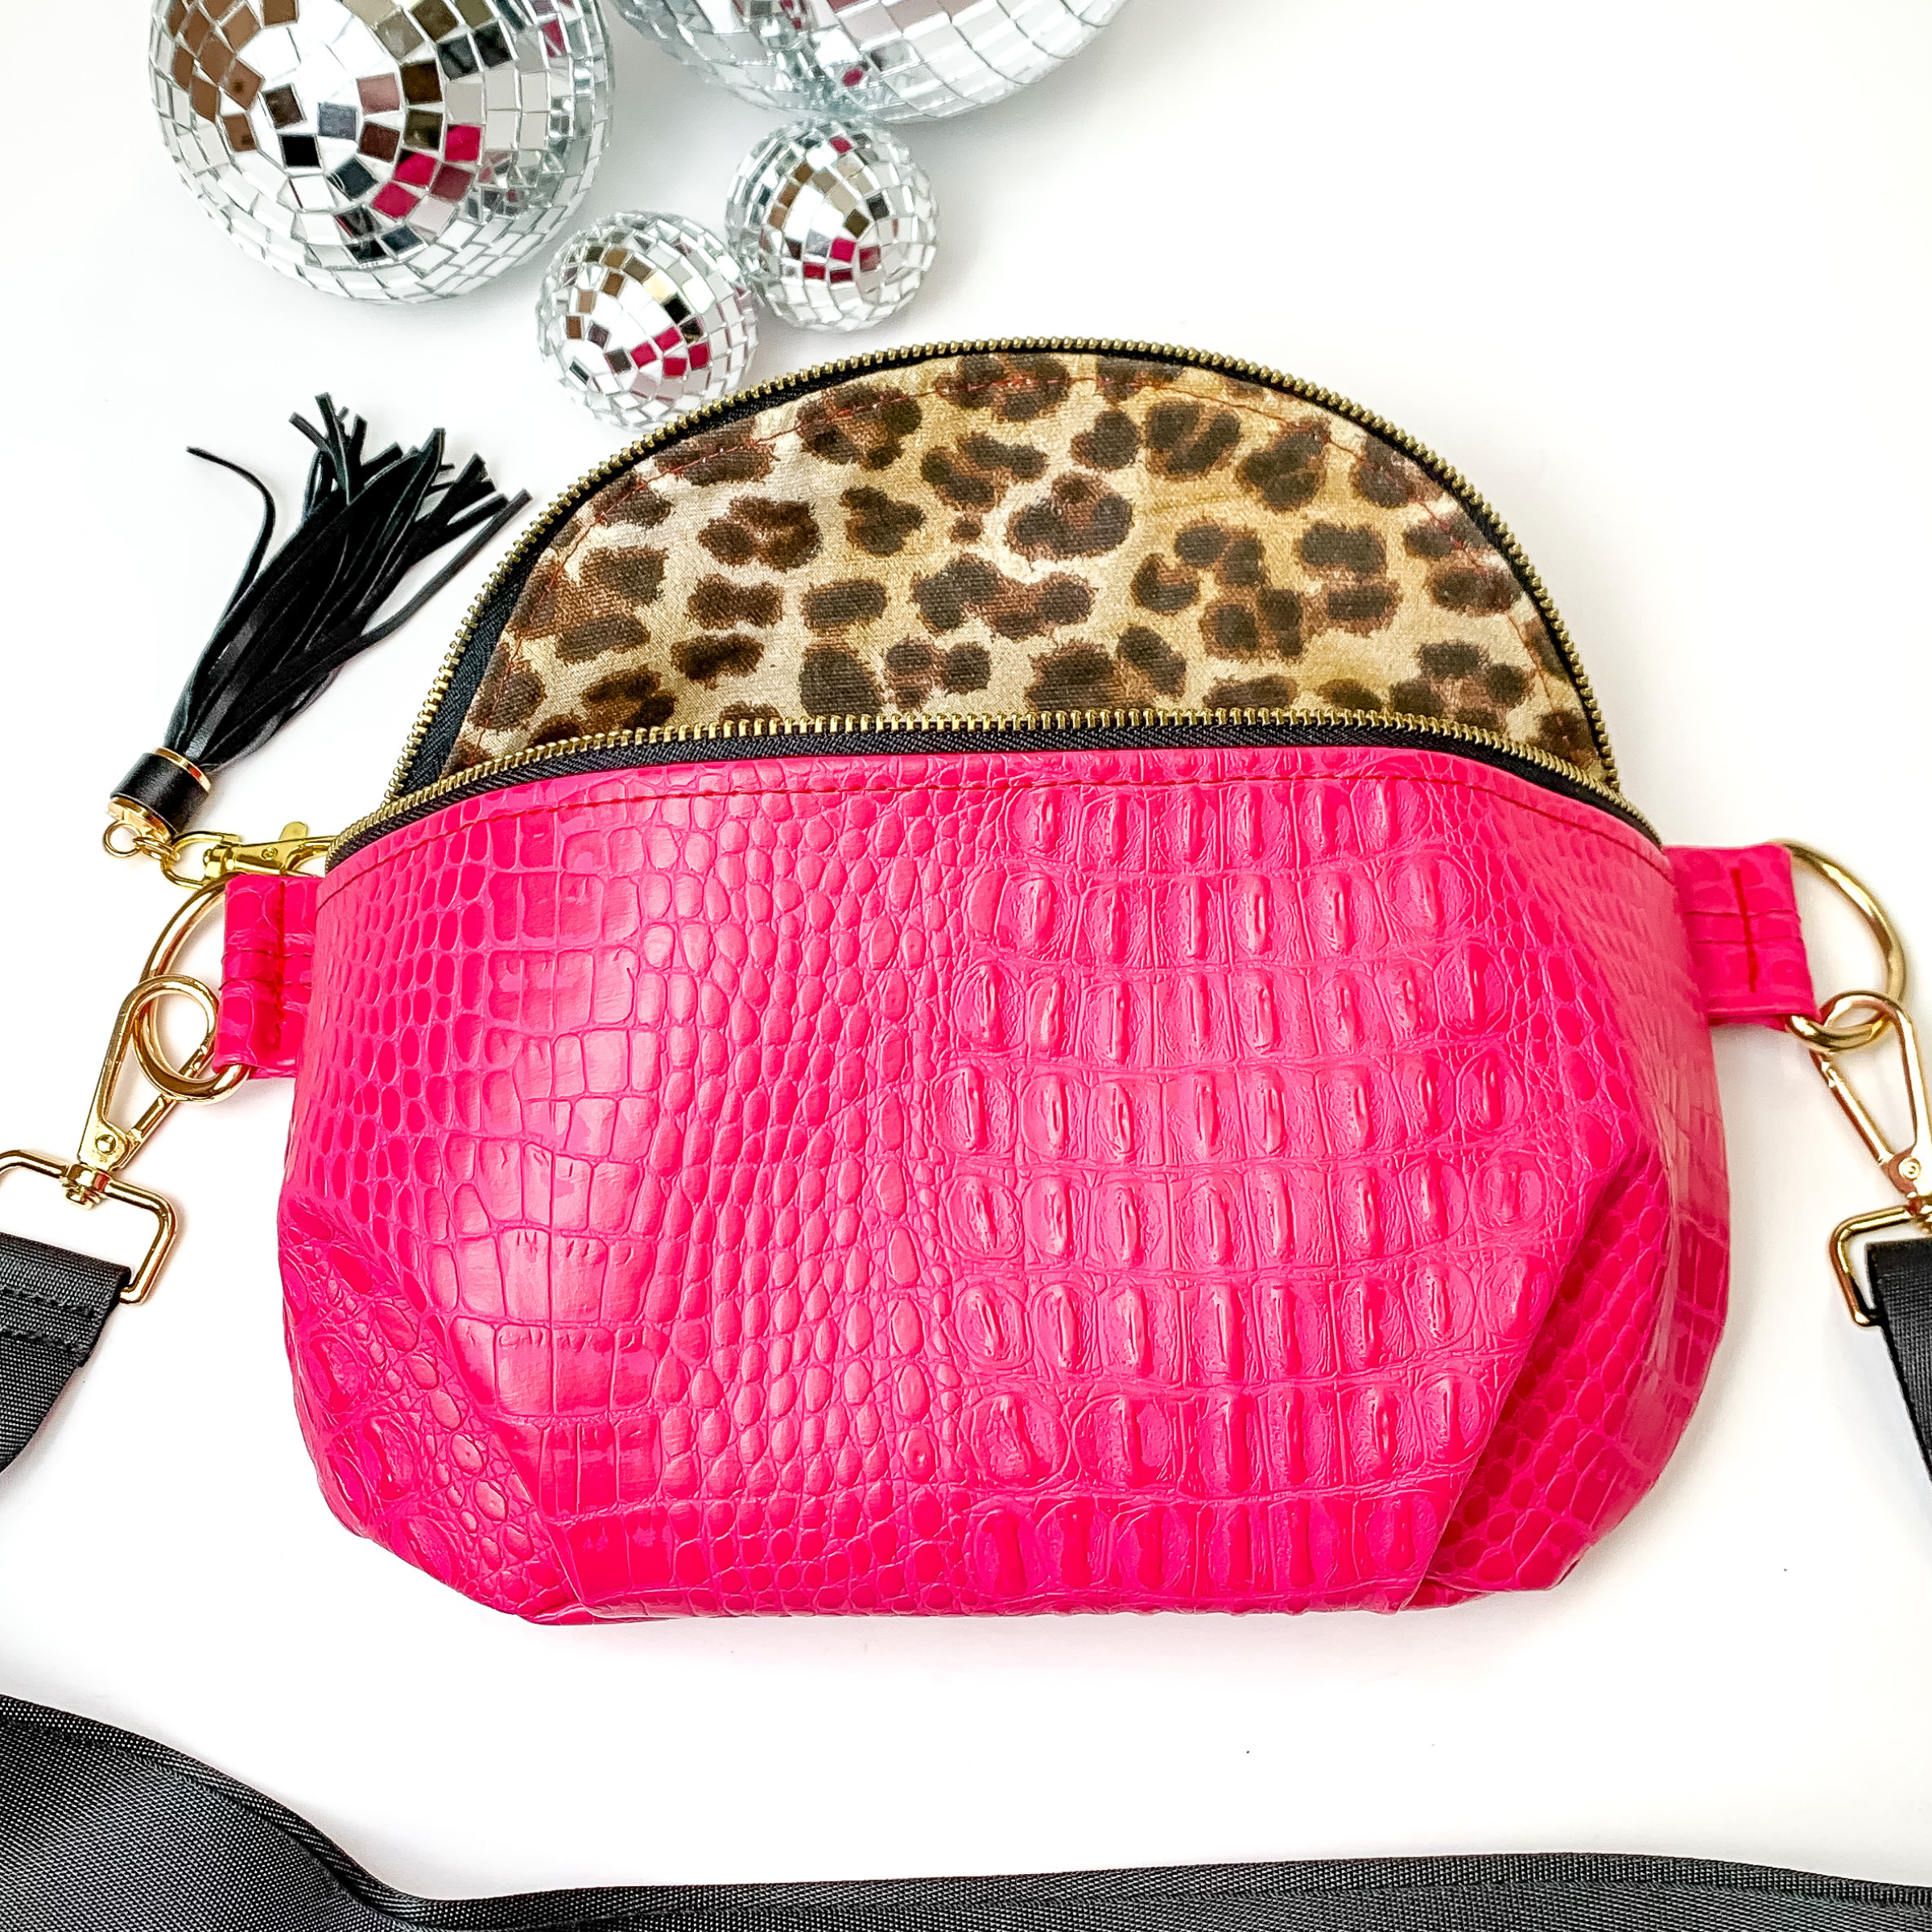 Makeup Junkie | Dolly Sidekick with Adjustable Strap in Hot Pink Croc Print - Giddy Up Glamour Boutique